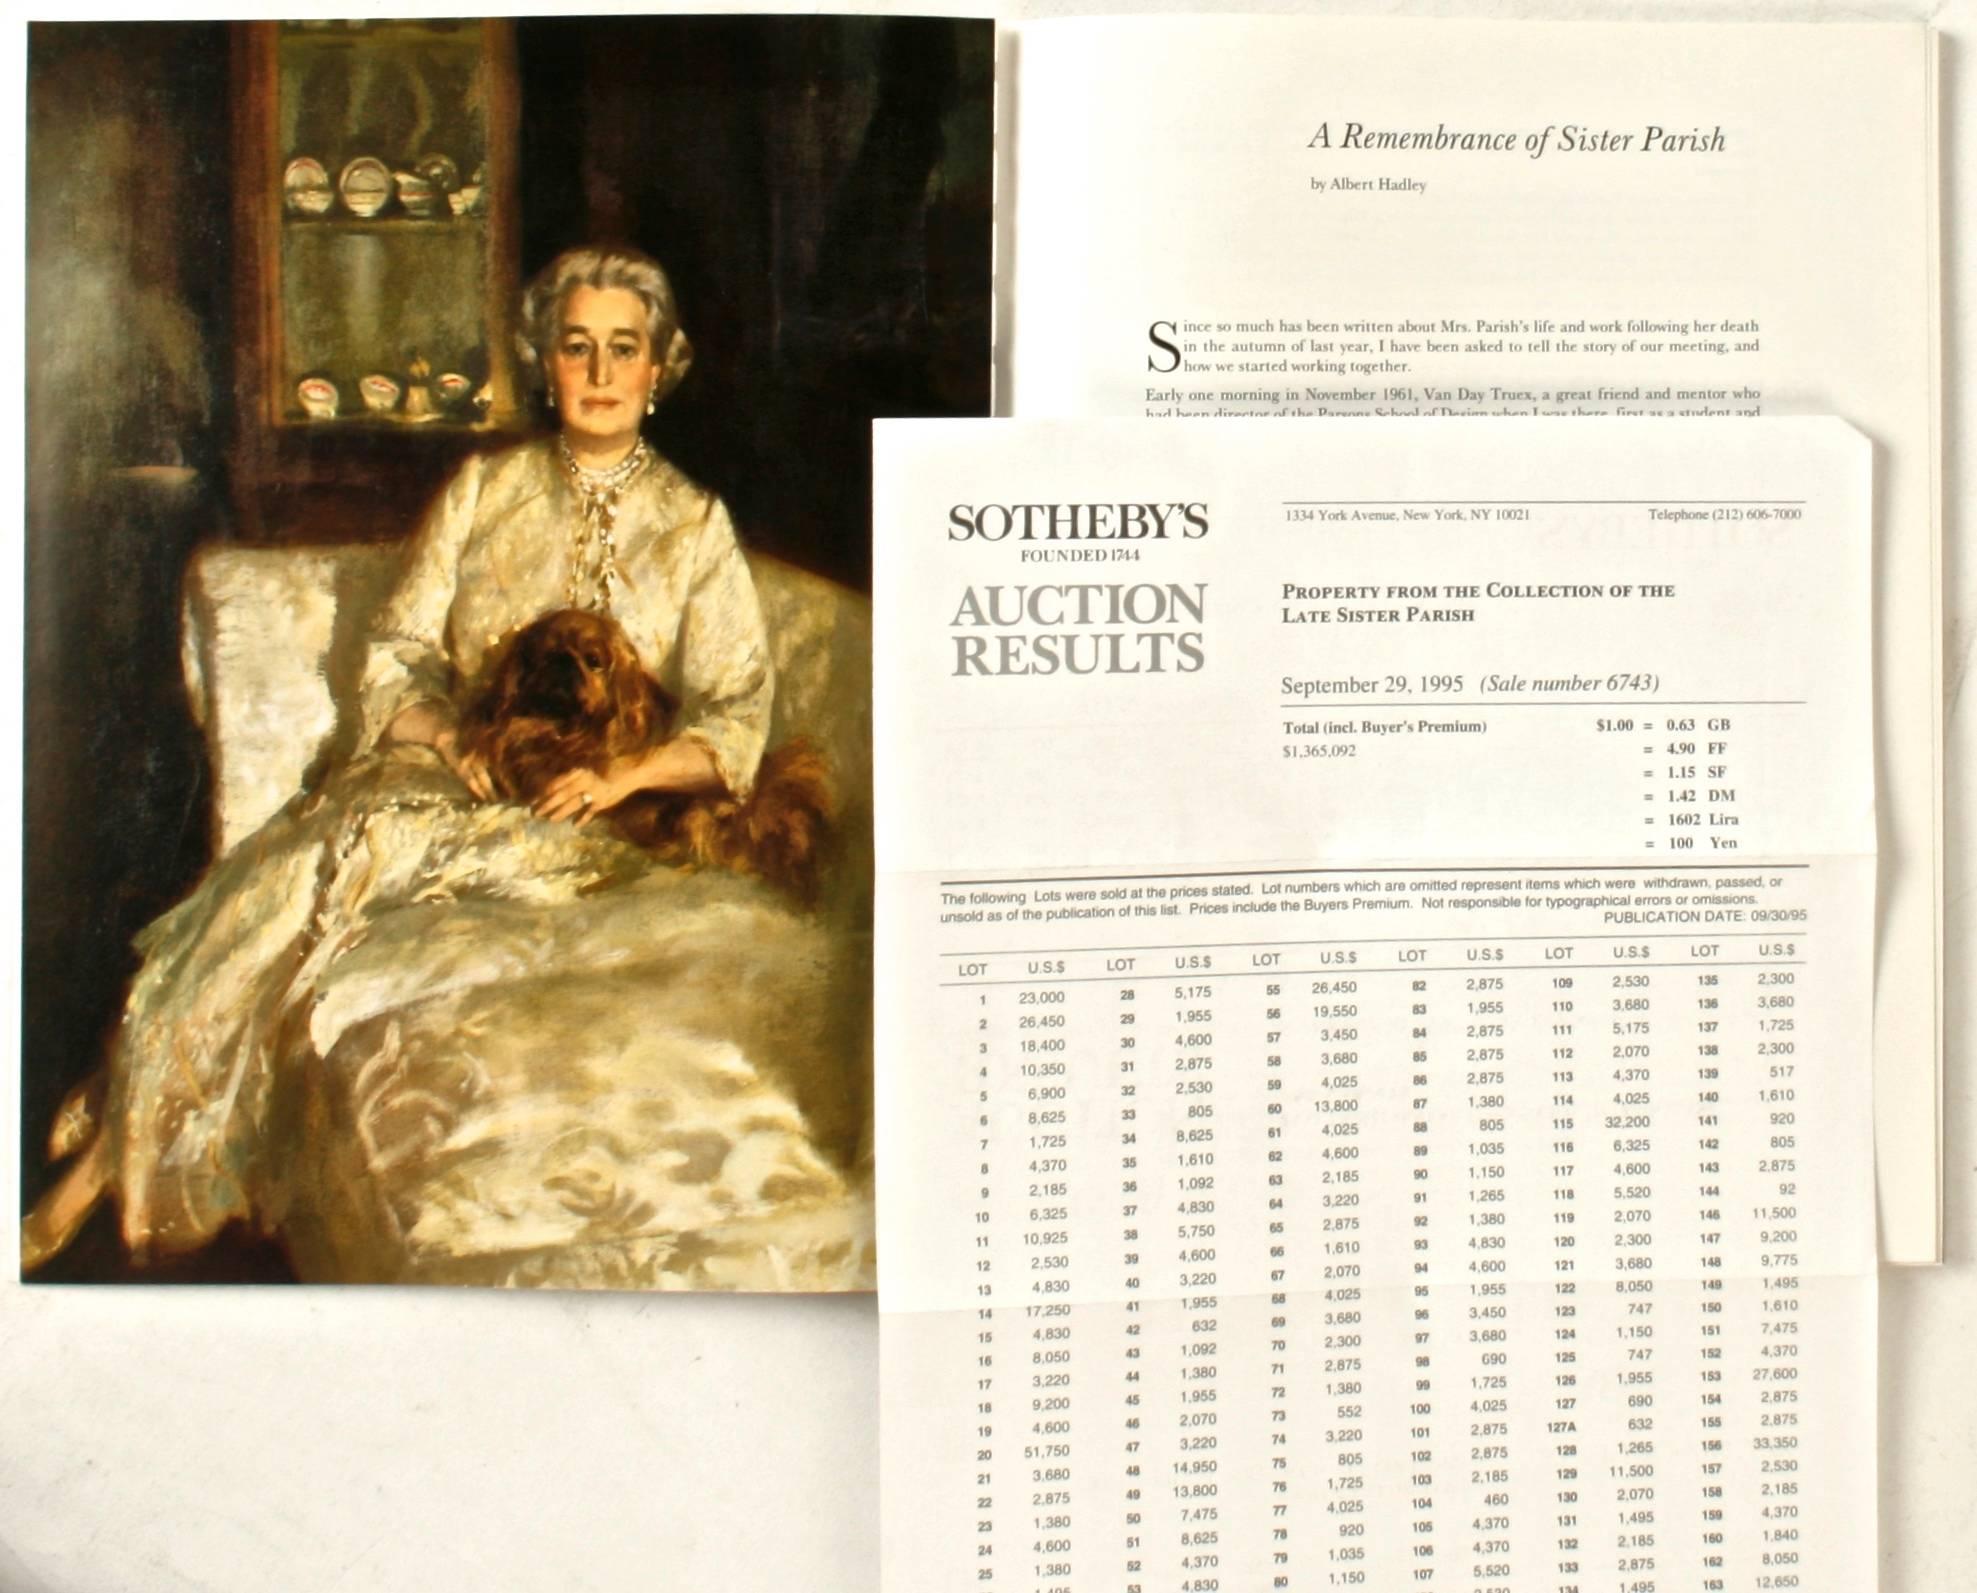 American Sotheby's Property from the Collection of the Late Sister Parish, 9/29/95